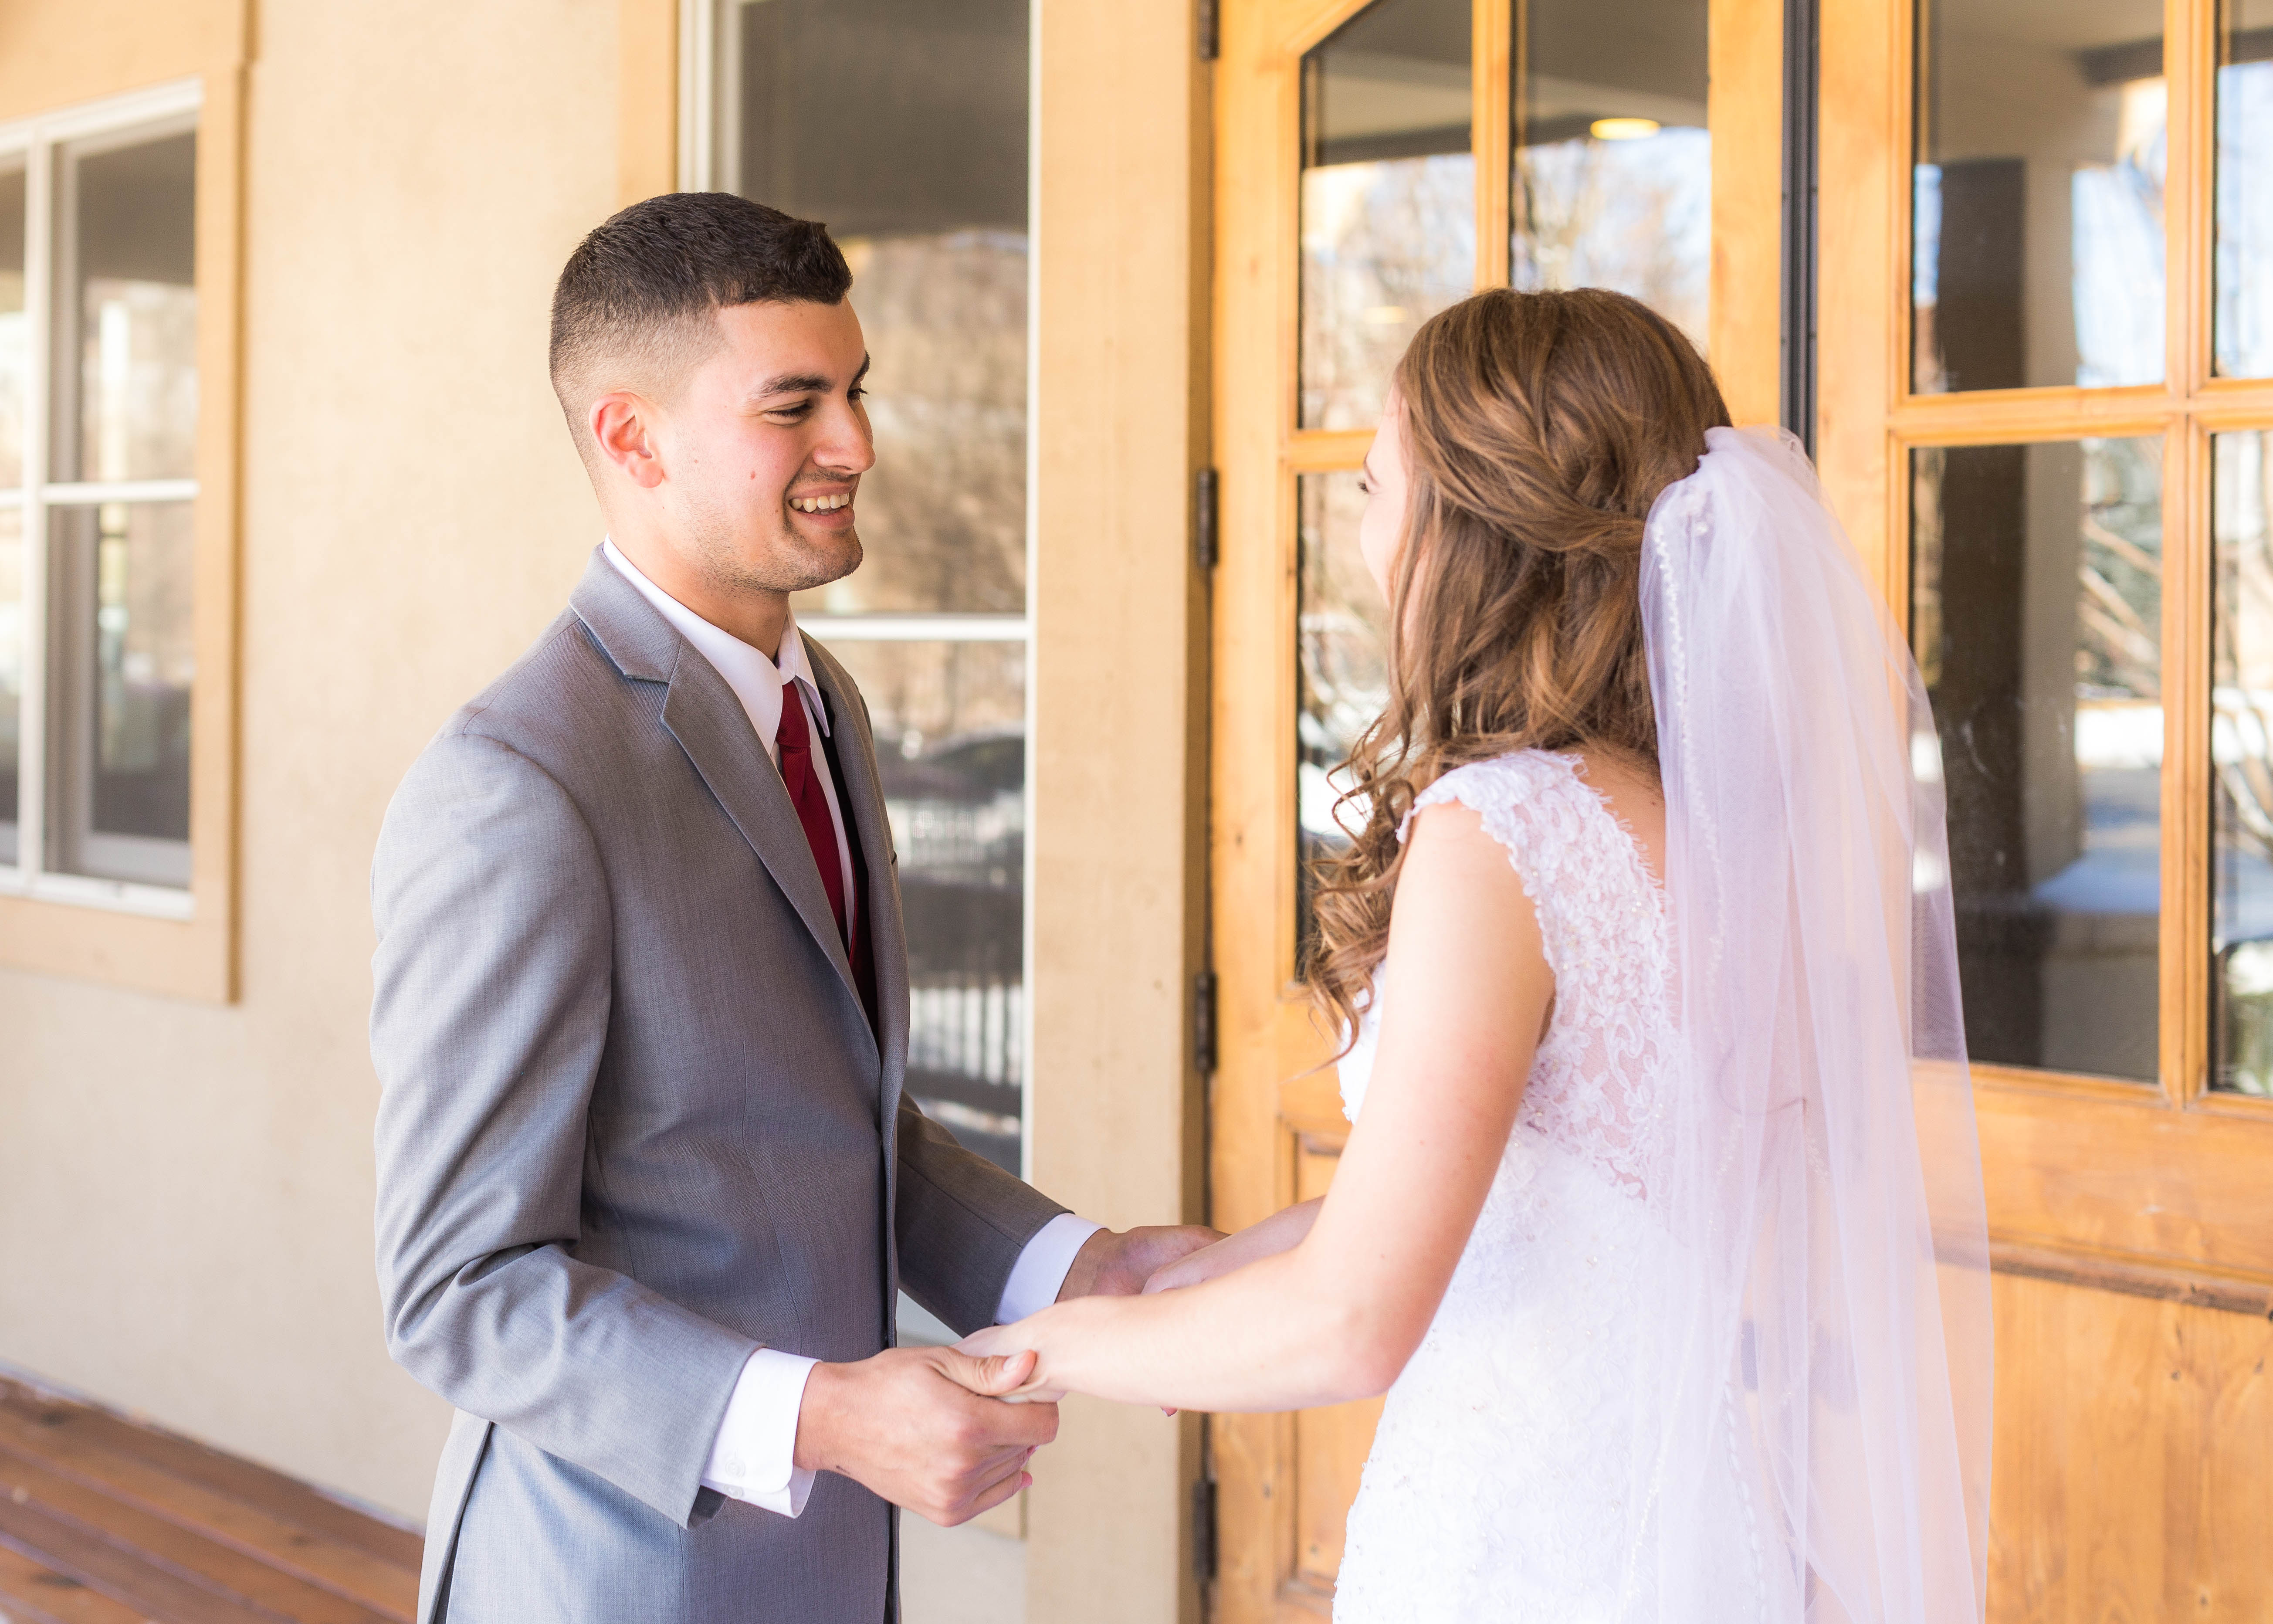 Groom smiles and holds bride's hands as he sees her for the first time on wedding day